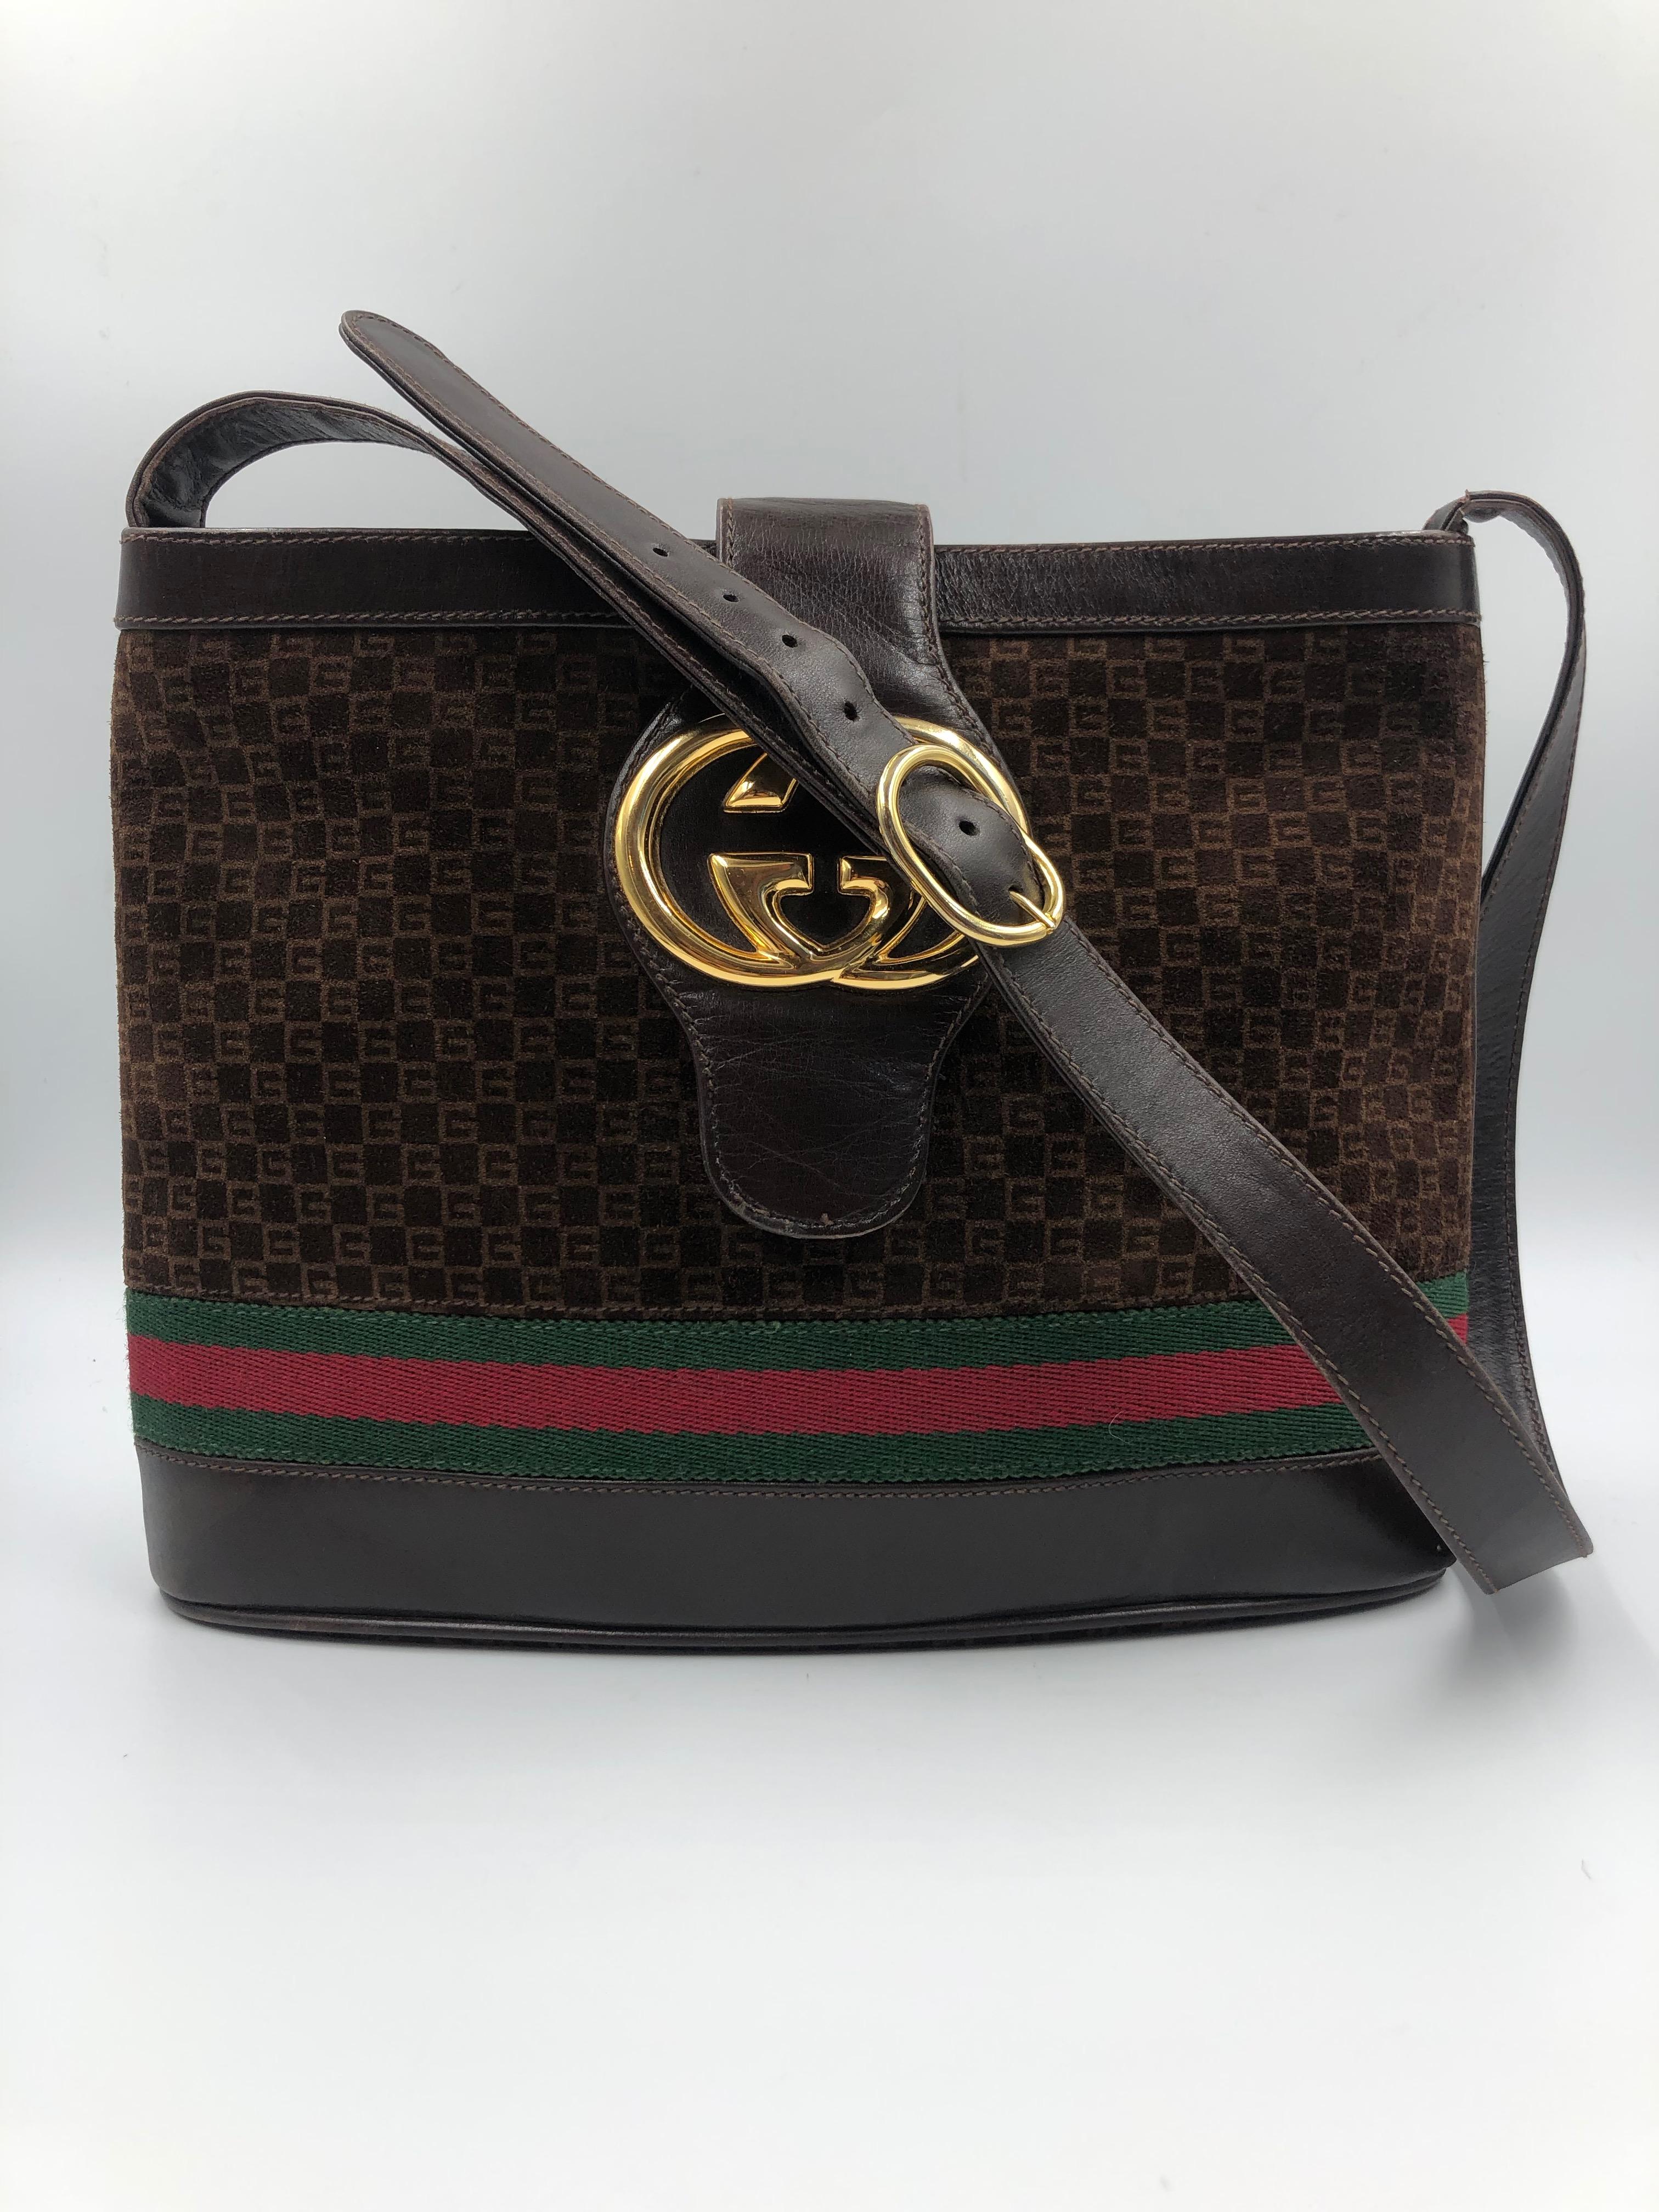 Gucci Brown Suede Bucket Bag with leather Snap Closure. Brown leather and woven Gucci signature red and green fabric stripe around the bottom of the bag. Brown leather adjustable crossbody shoulder strap with belt style closure.

Measurements taken